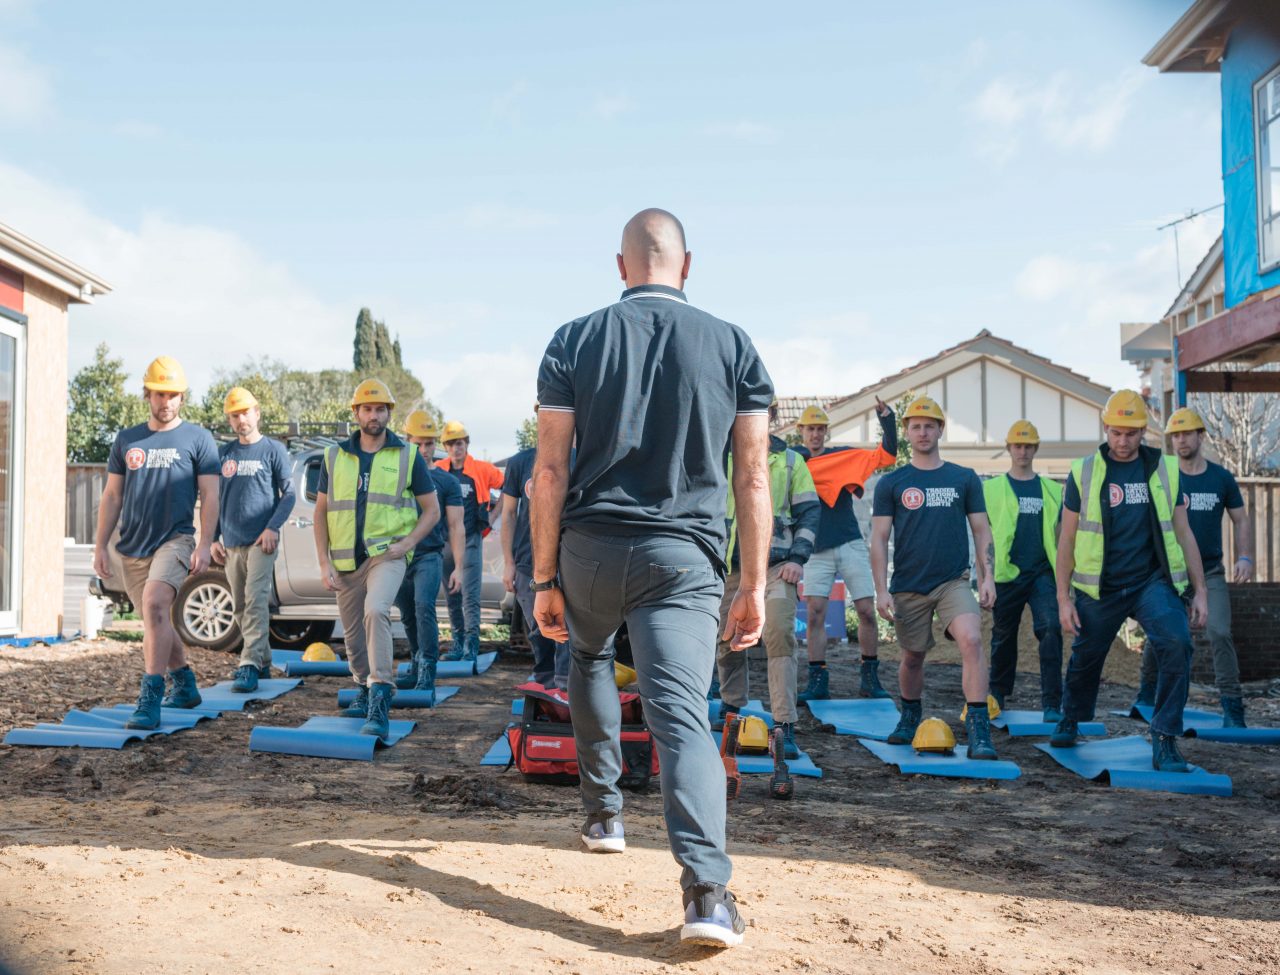 Tradies’ National Health Month – August 2016